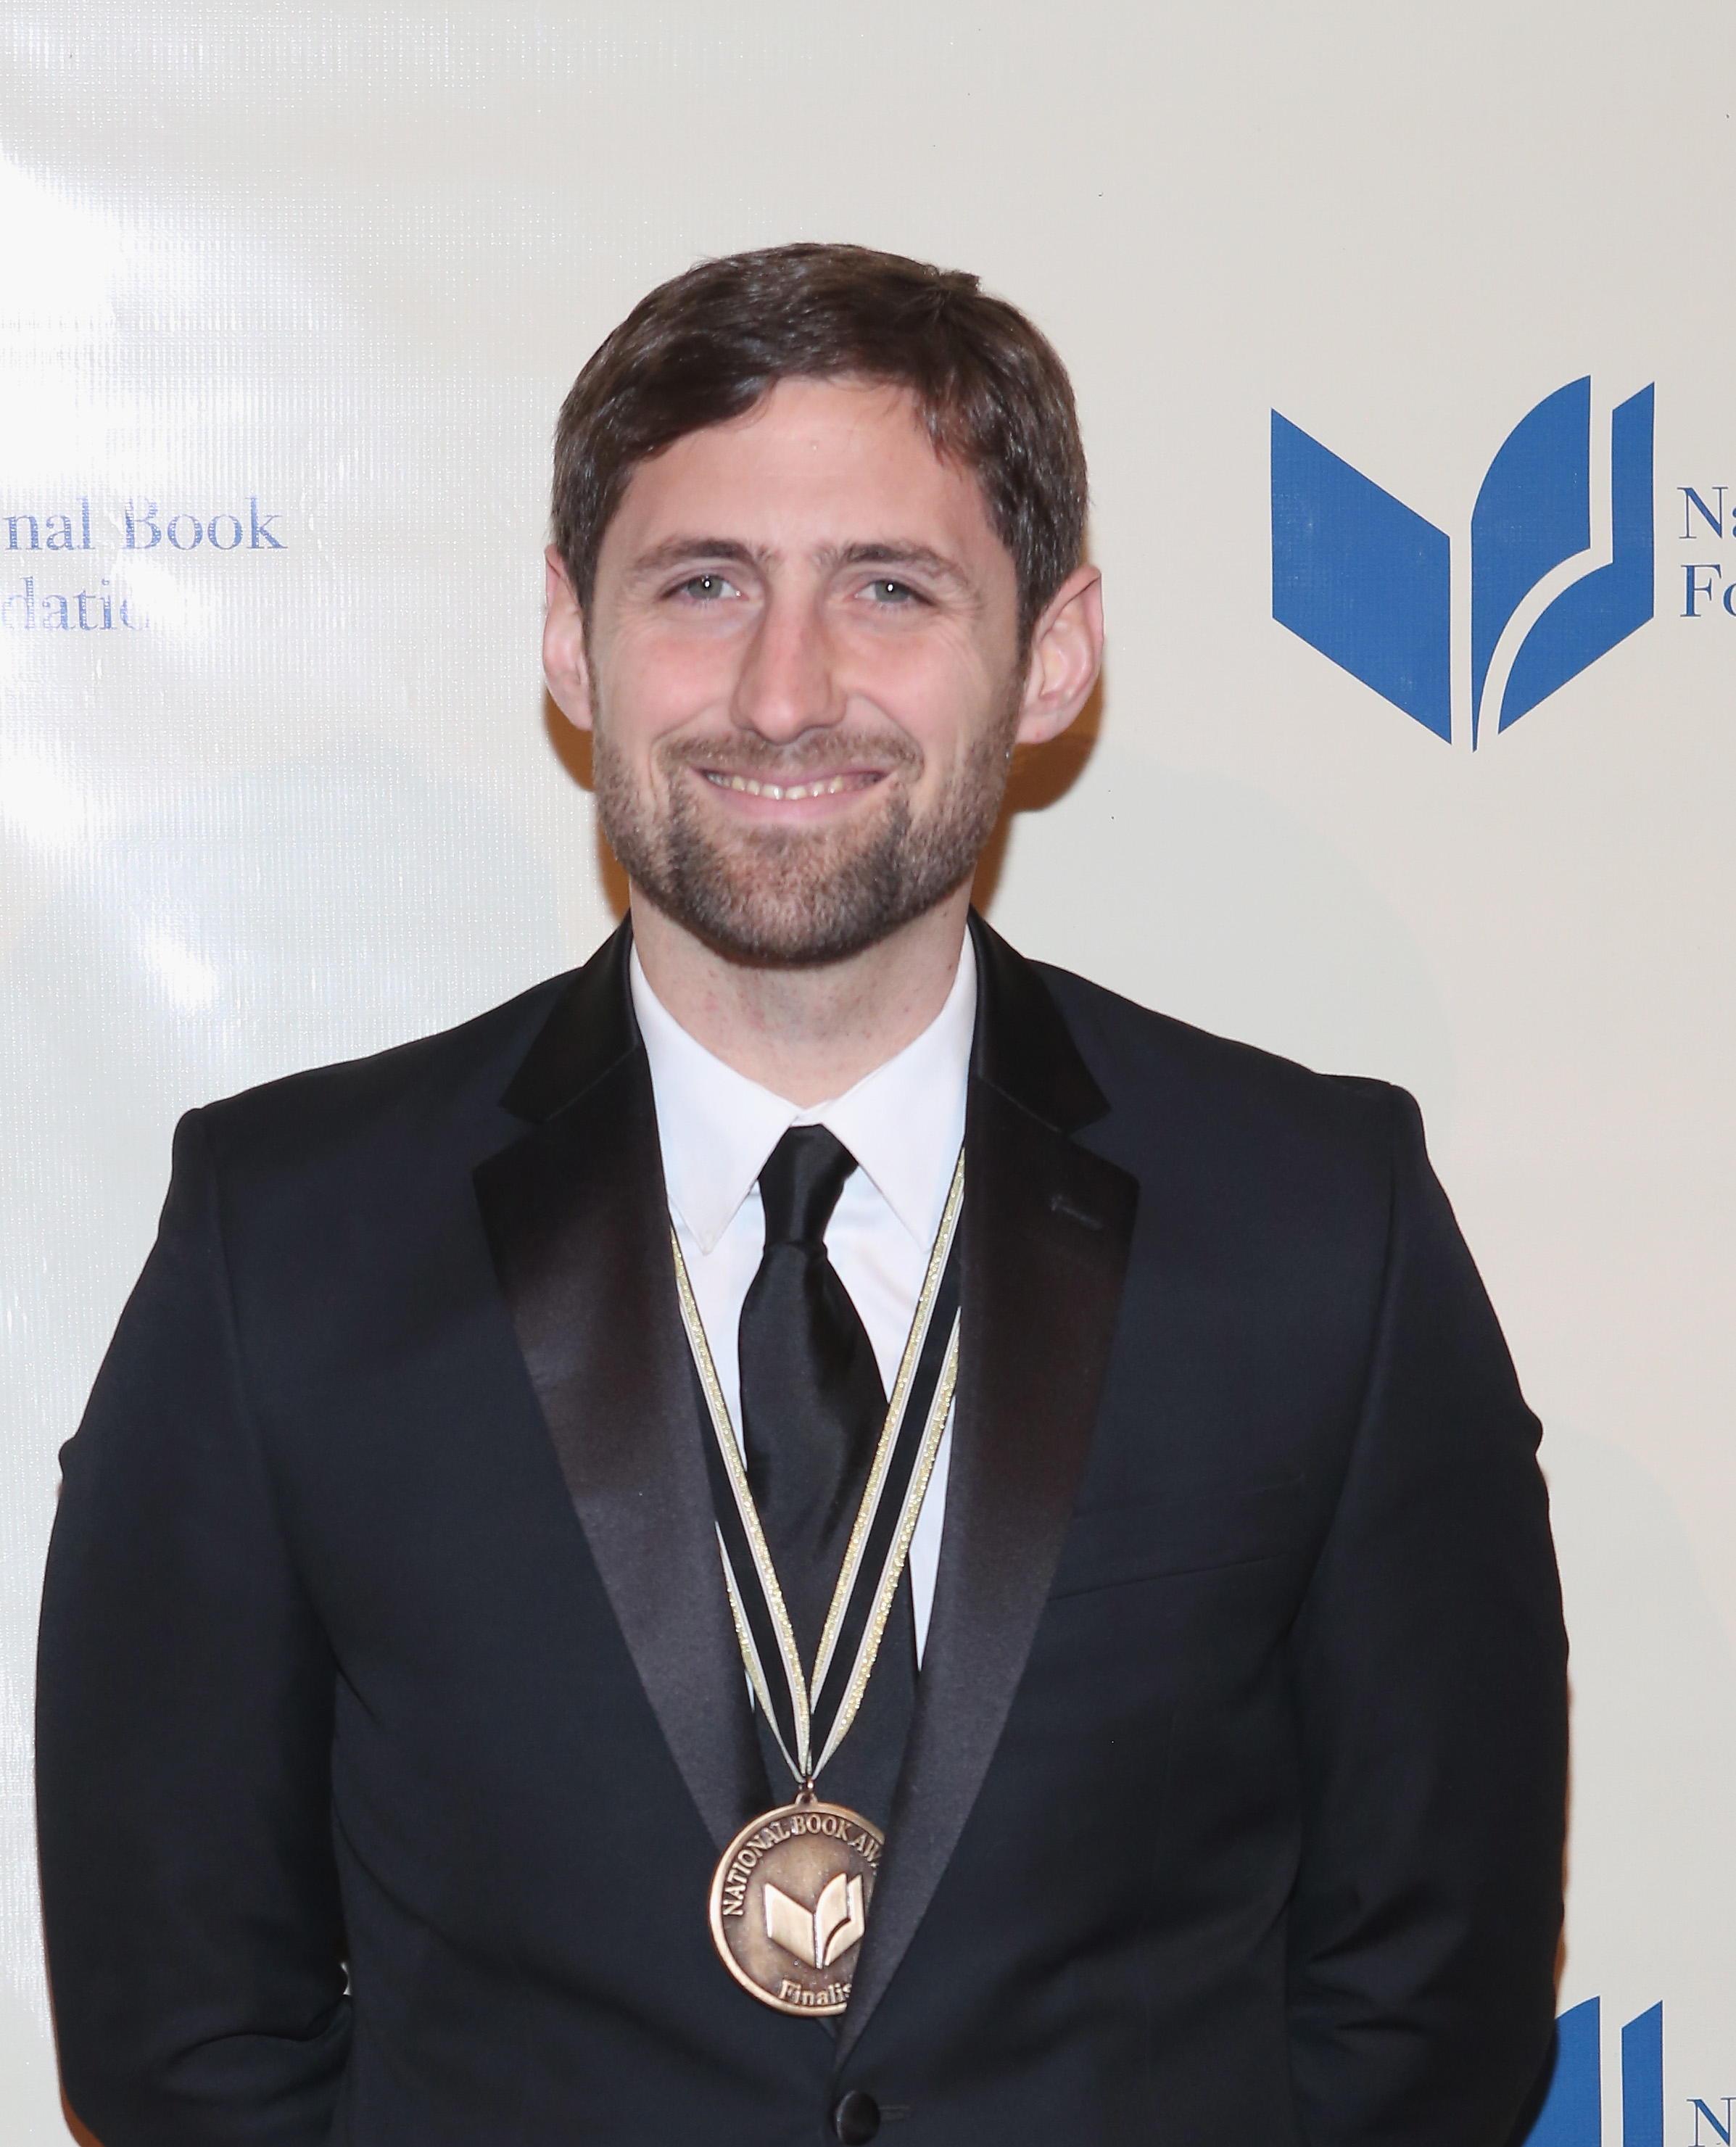 Phil Klay attends the National Book Awards on Nov. 19, 2014 in New York City. (Robin Marchant—Getty Images)